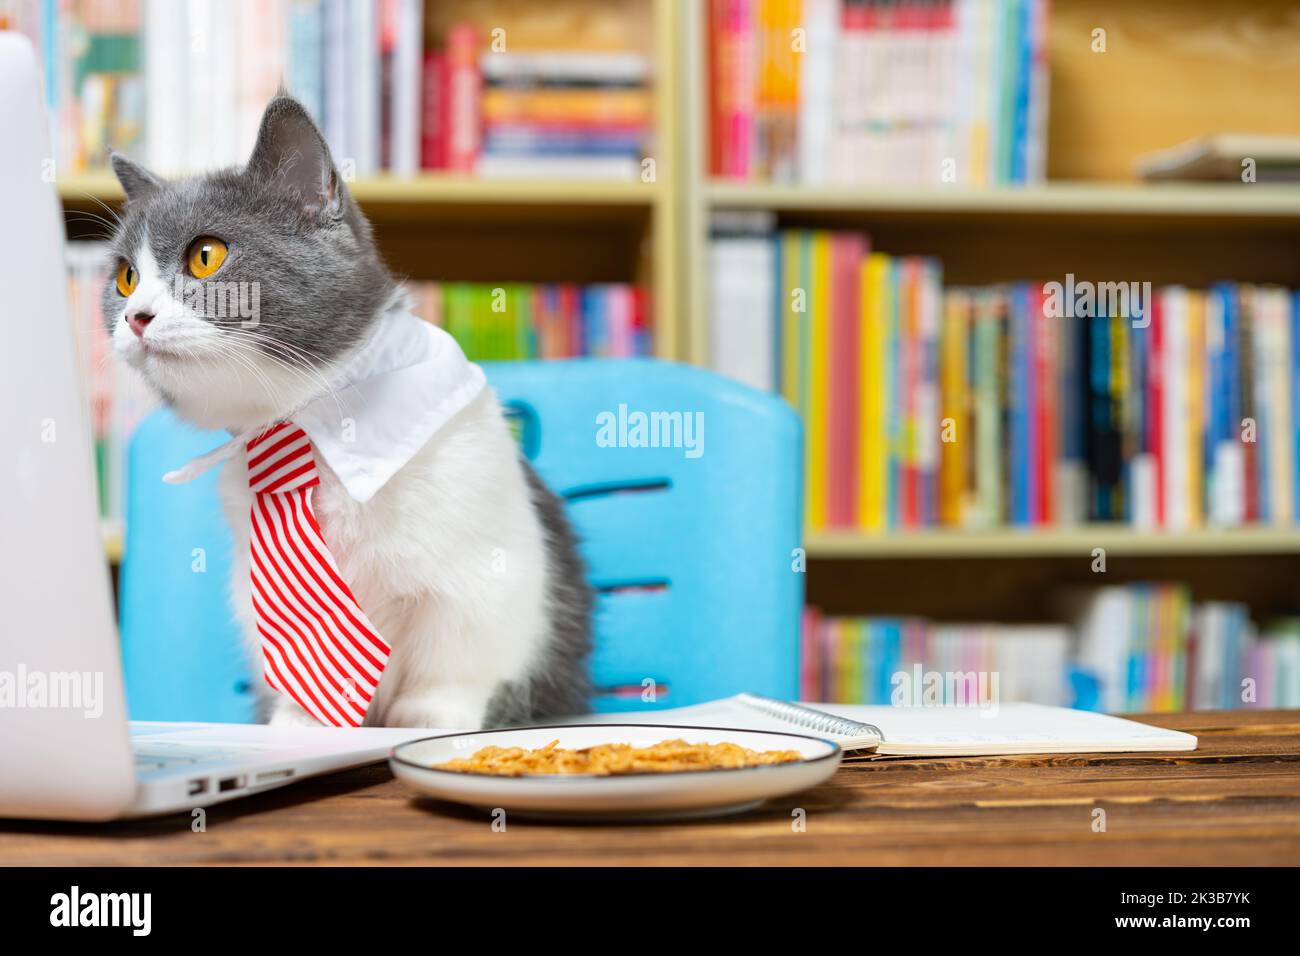 cute british shorthair cat with business tie and working with a laptop on a table Stock Photo